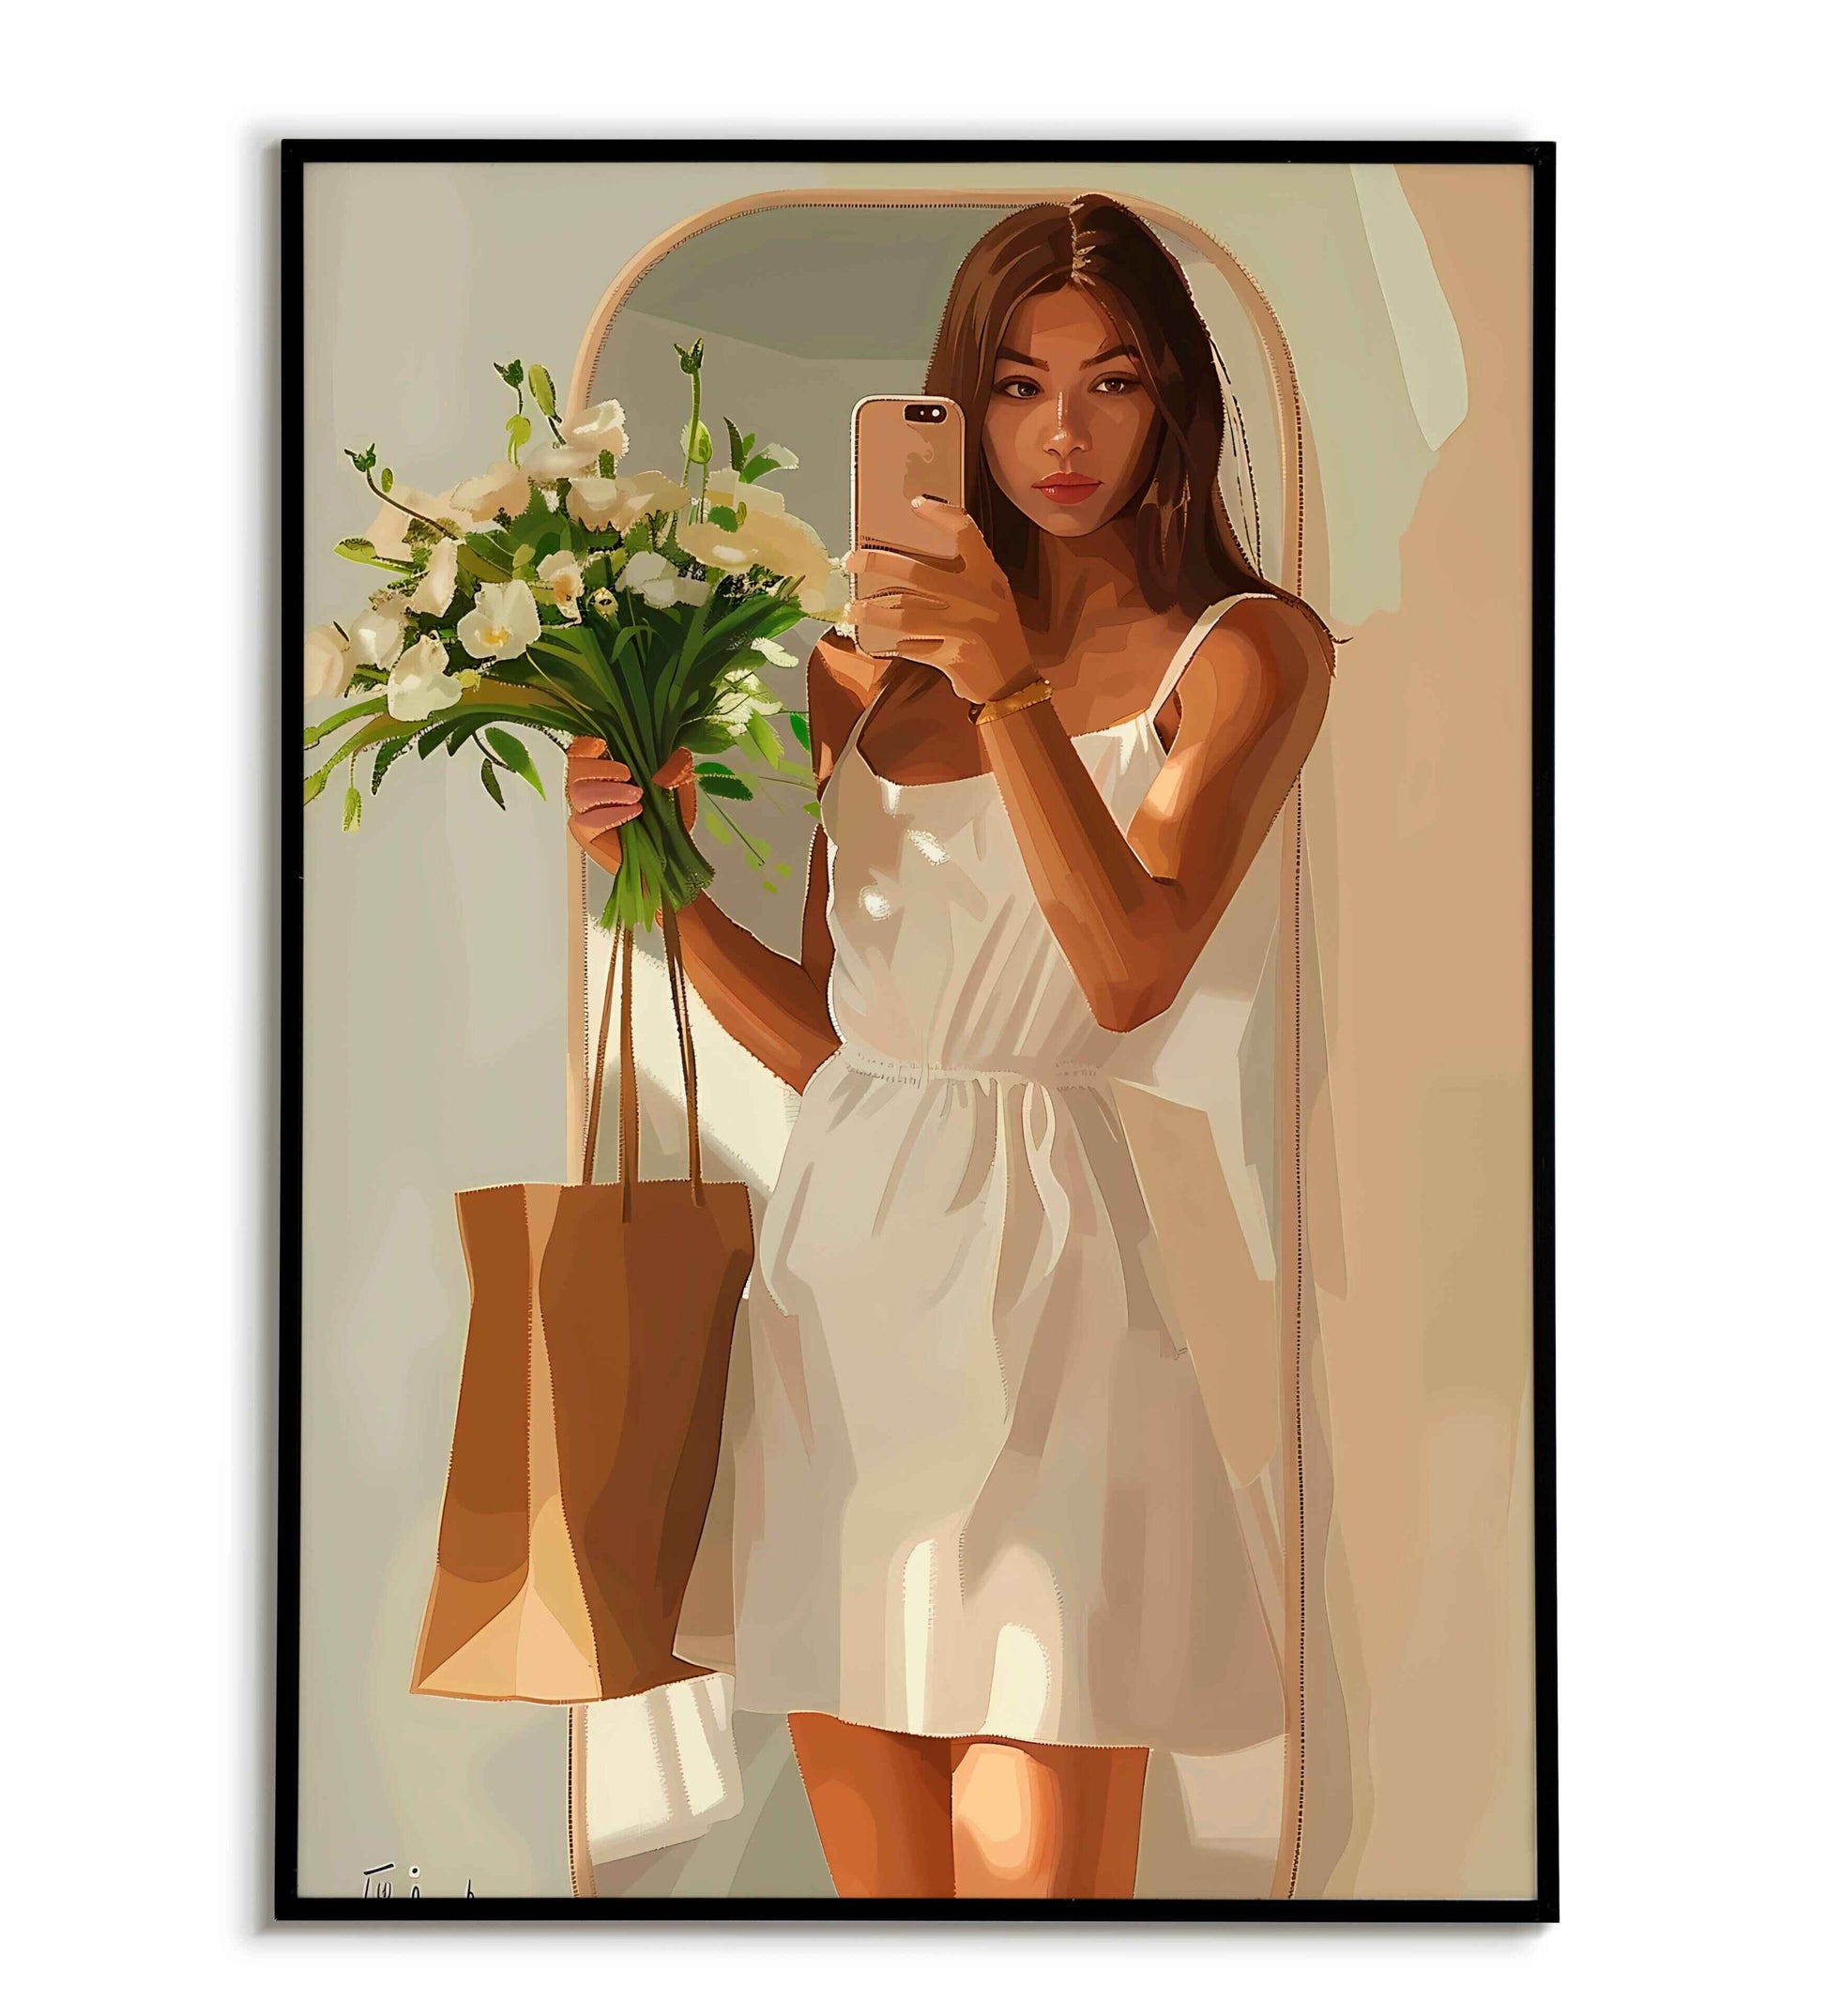 Mirror Selfie(2 of 5) printable poster. Available for purchase as a physical poster or digital download.